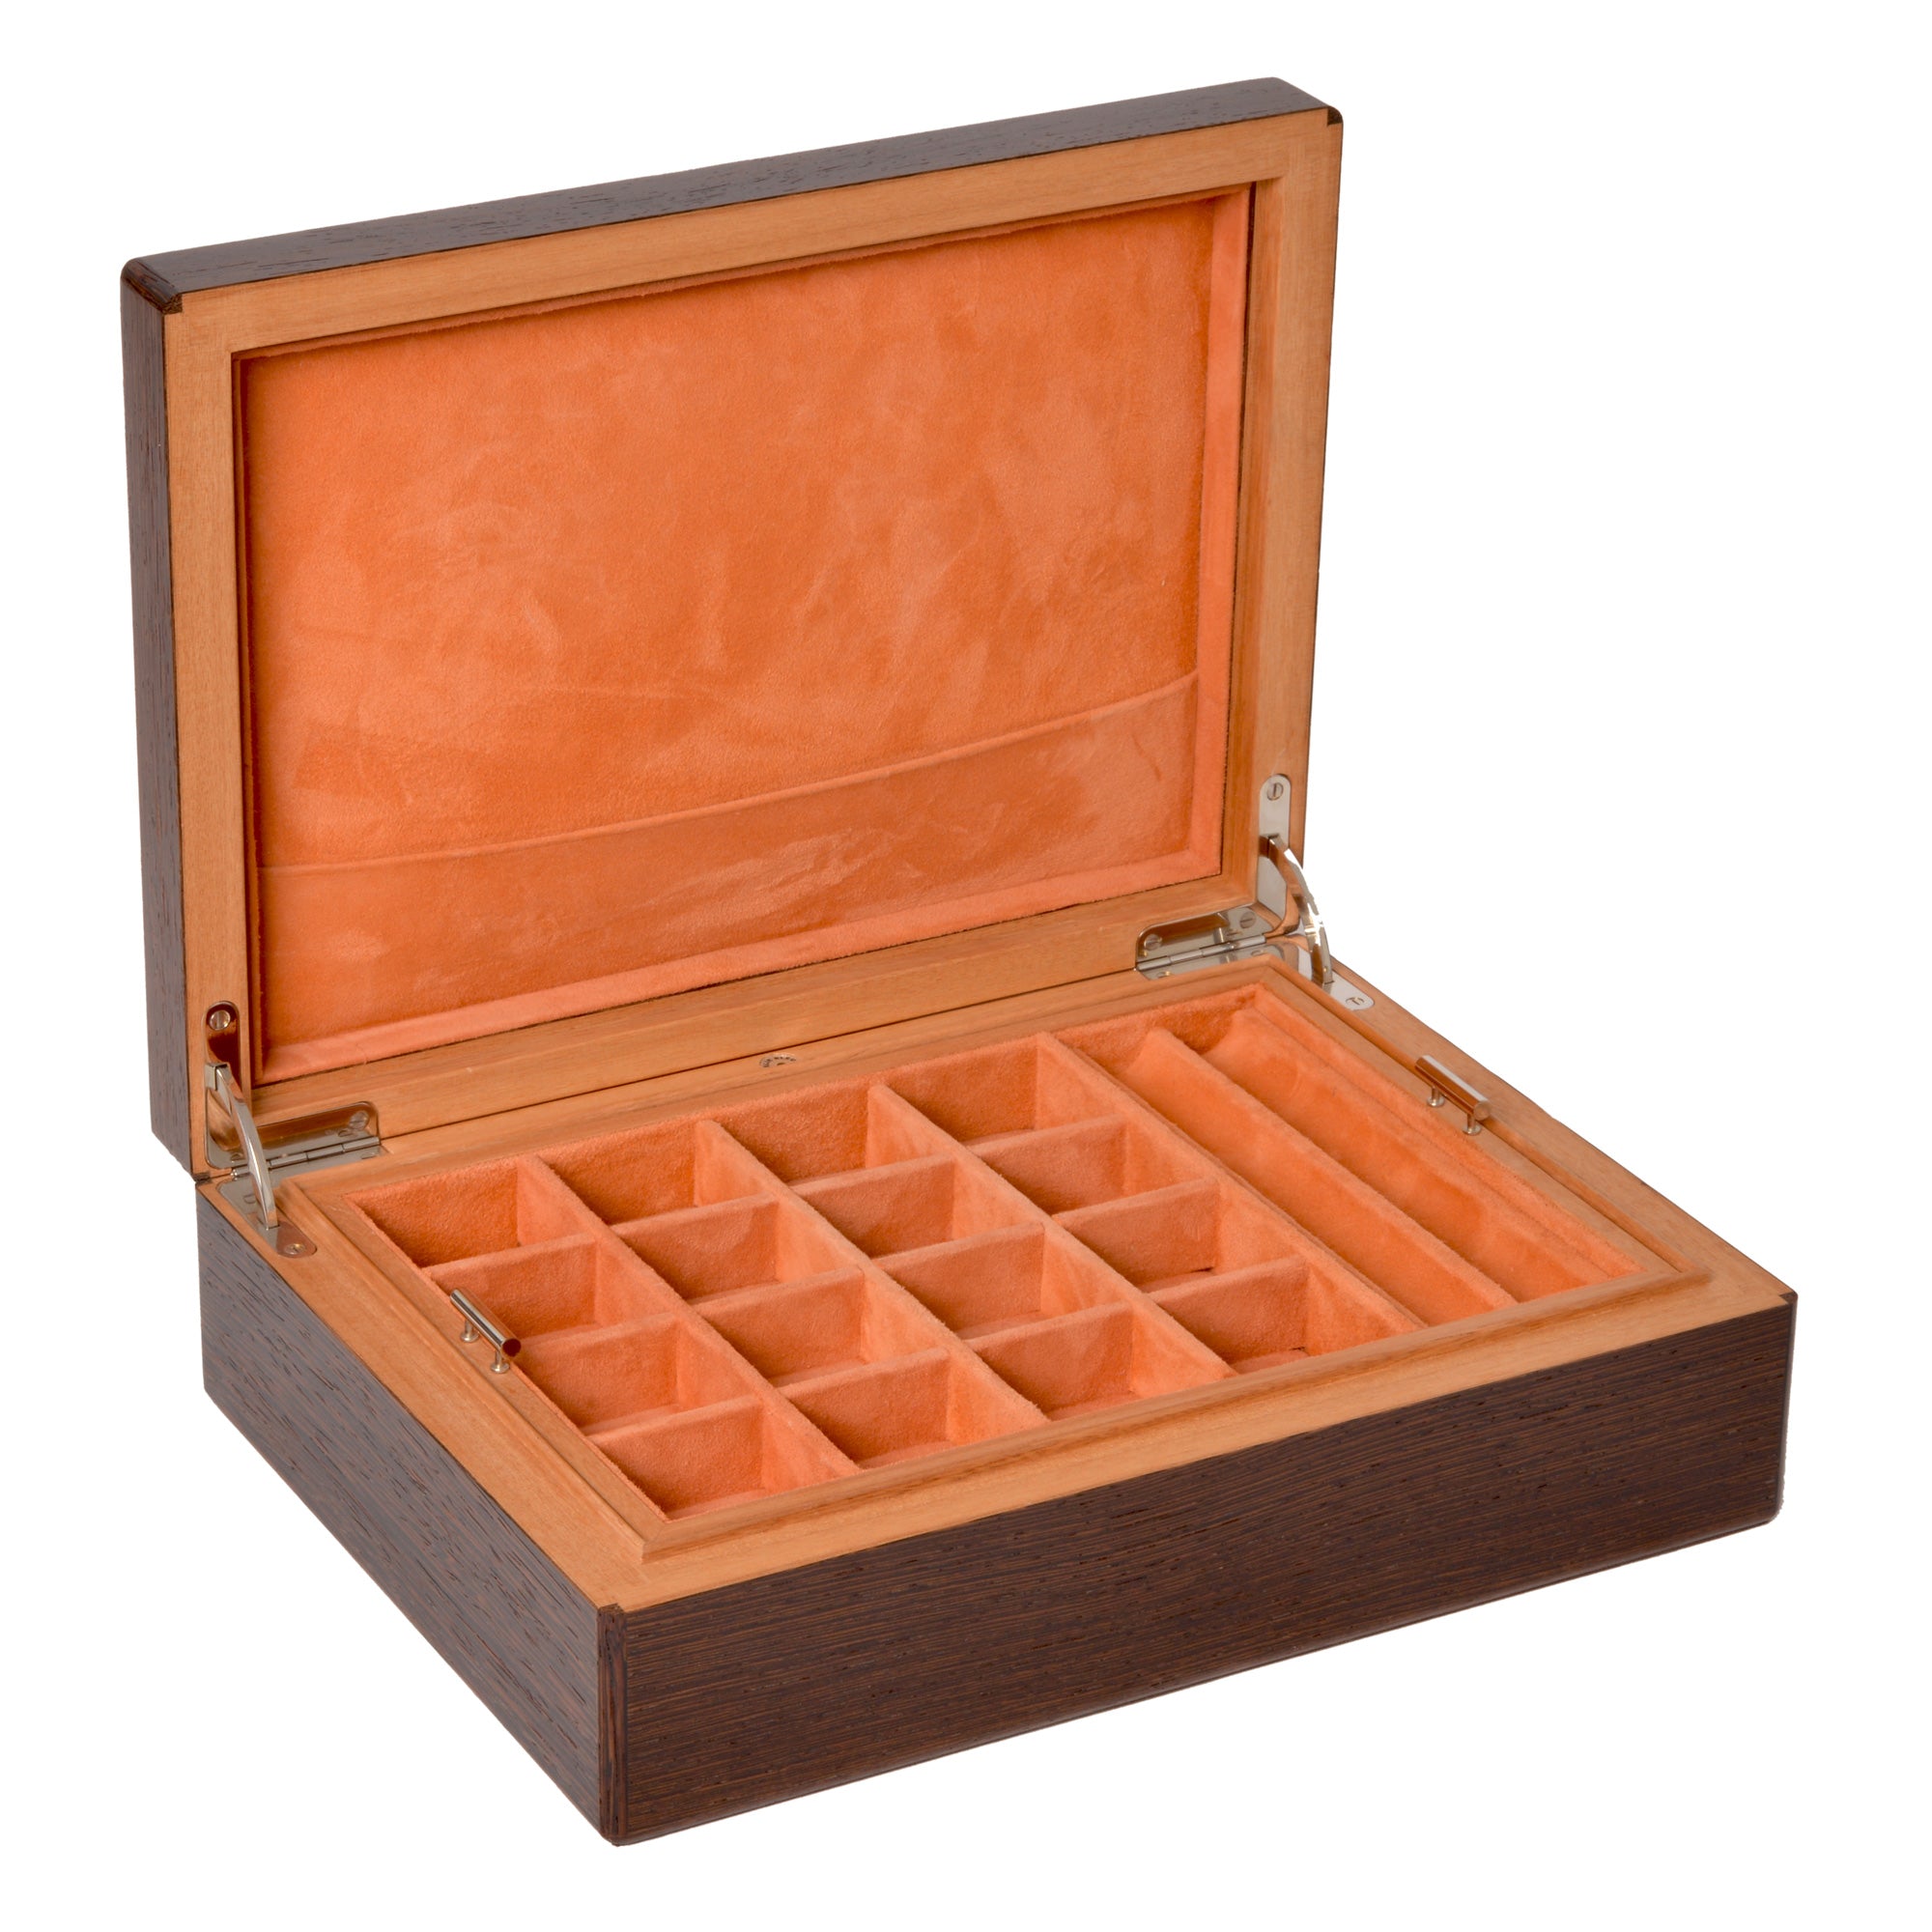 "Classique" - Box for 16 pairs of cufflinks and 2 pens